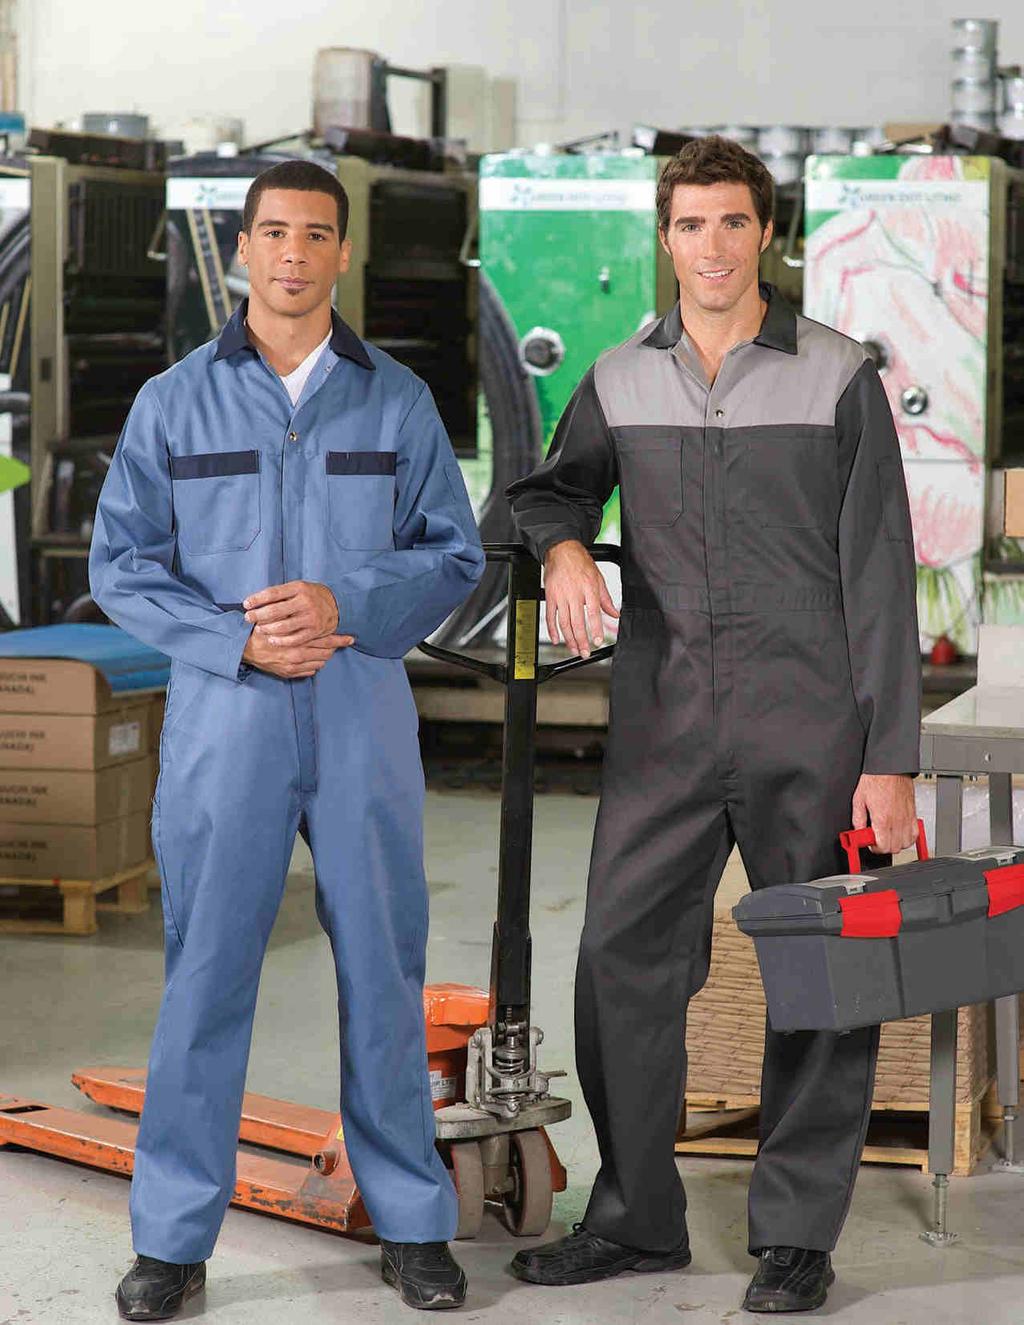 CONTRAST COVERALLS s419 s41558 Trimmed Coveralls Contrast trim details make this a distinctive coverall choice. The heavy weight 7.25 oz.